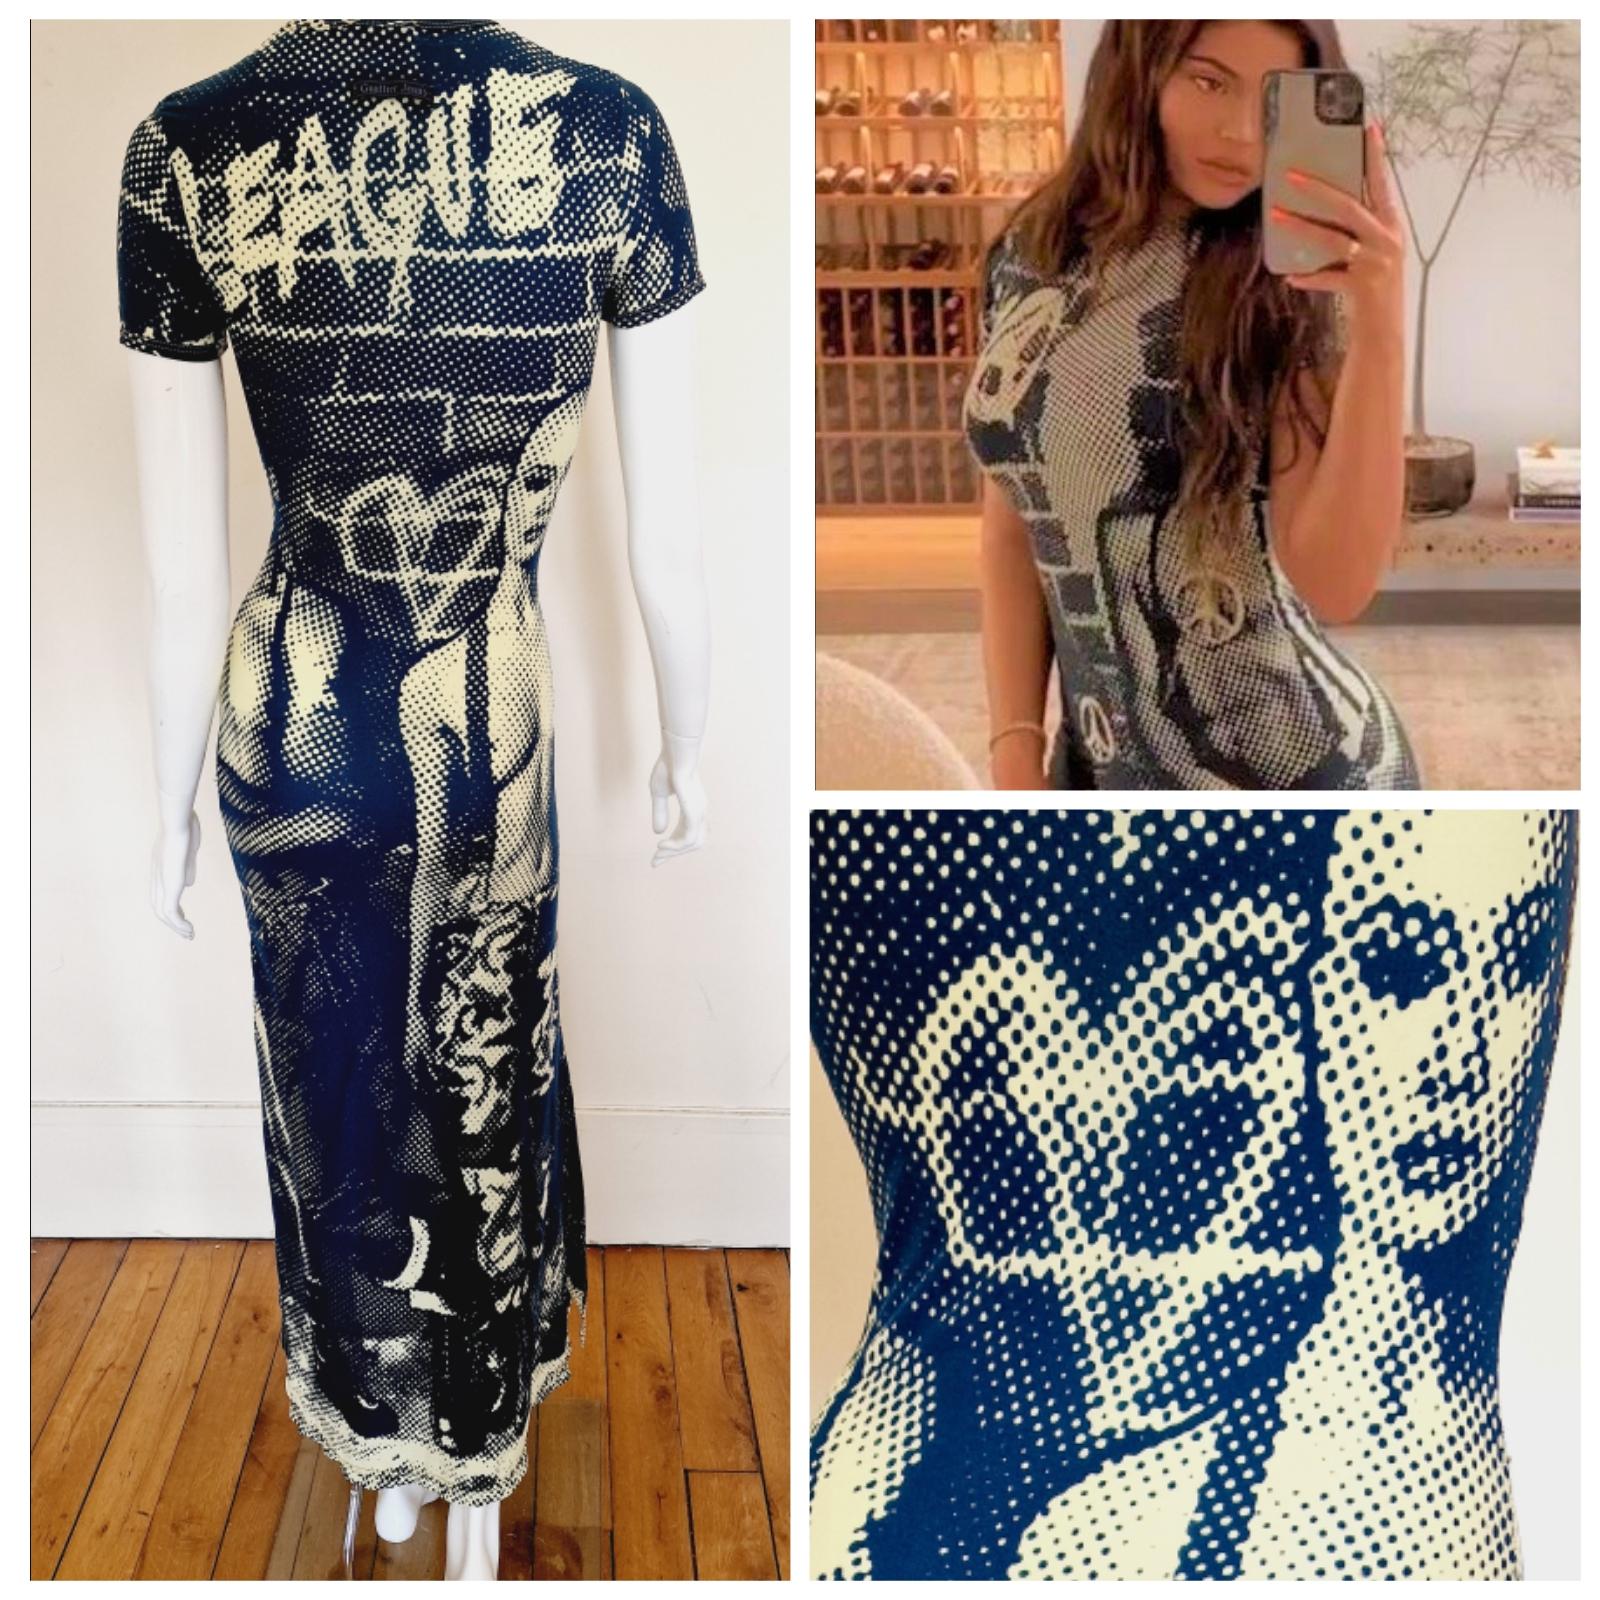 Iconic Jean Paul Gaultier Jean's “Fight Racism” dress from the 1997 Autumn Winter Collection!

In this collection, the french designer launched a graphic prints series in a newspaper effect that advocate the fight against racism. At close sight, you